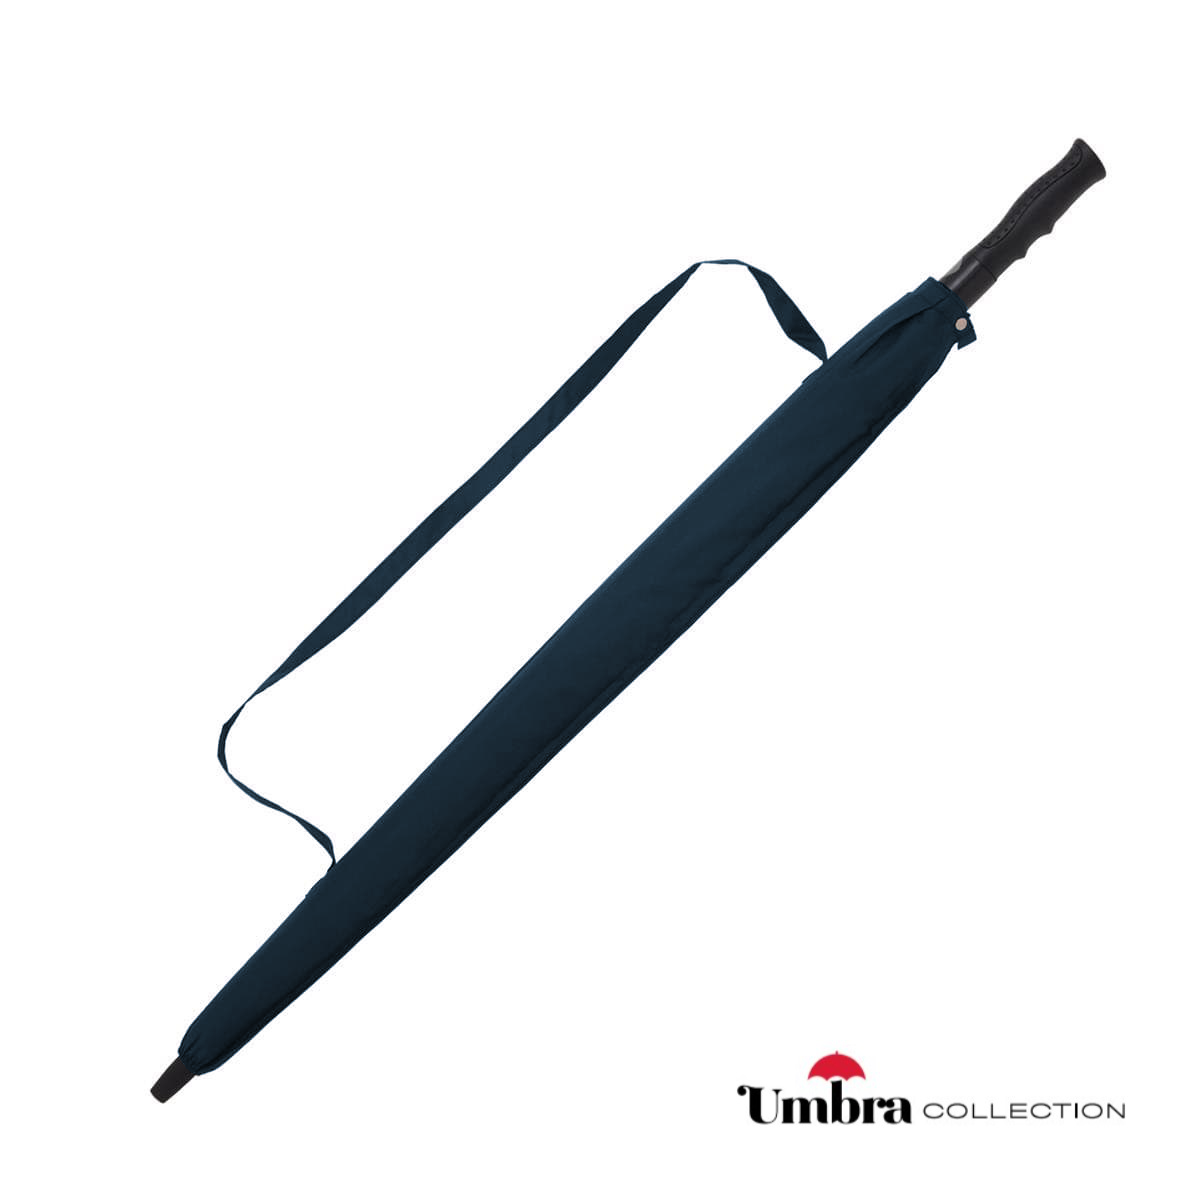 UMBRA_-ultimate-heavy-duty-umbrella-superior-fibreglass-ultimate_-frame-double-layer-wind-vent-system-navy-4